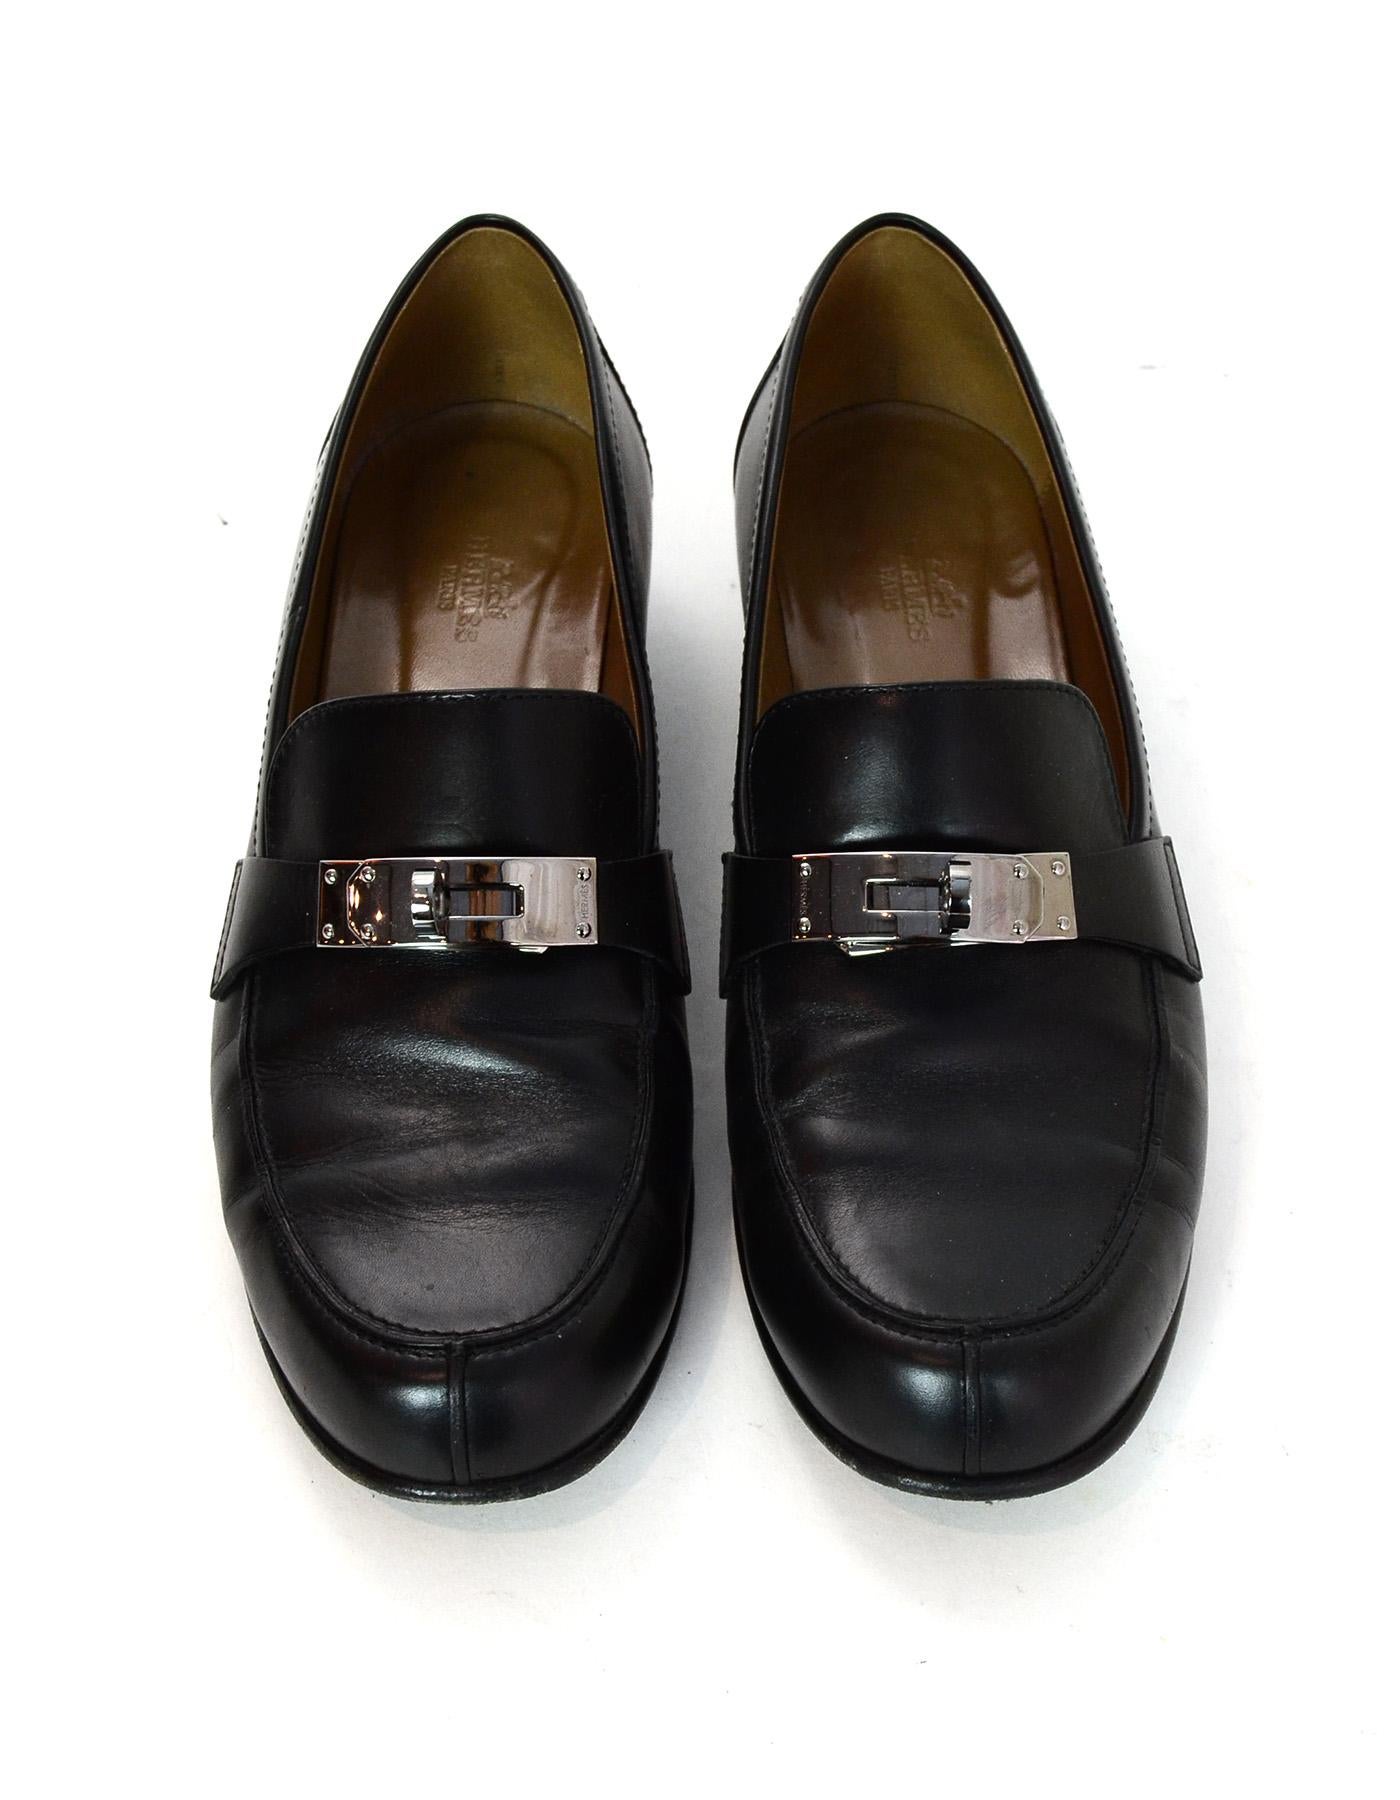 Hermes Black Leather Palladium Jule Heeled Loafers W/ Kelly Buckle Sz 40

Made In: Italy
Color: Black
Hardware: Palladium
Materials: Leather and palladium metal 
Closure/Opening: Slide on
Overall Condition: Excellent pre-owned condition with